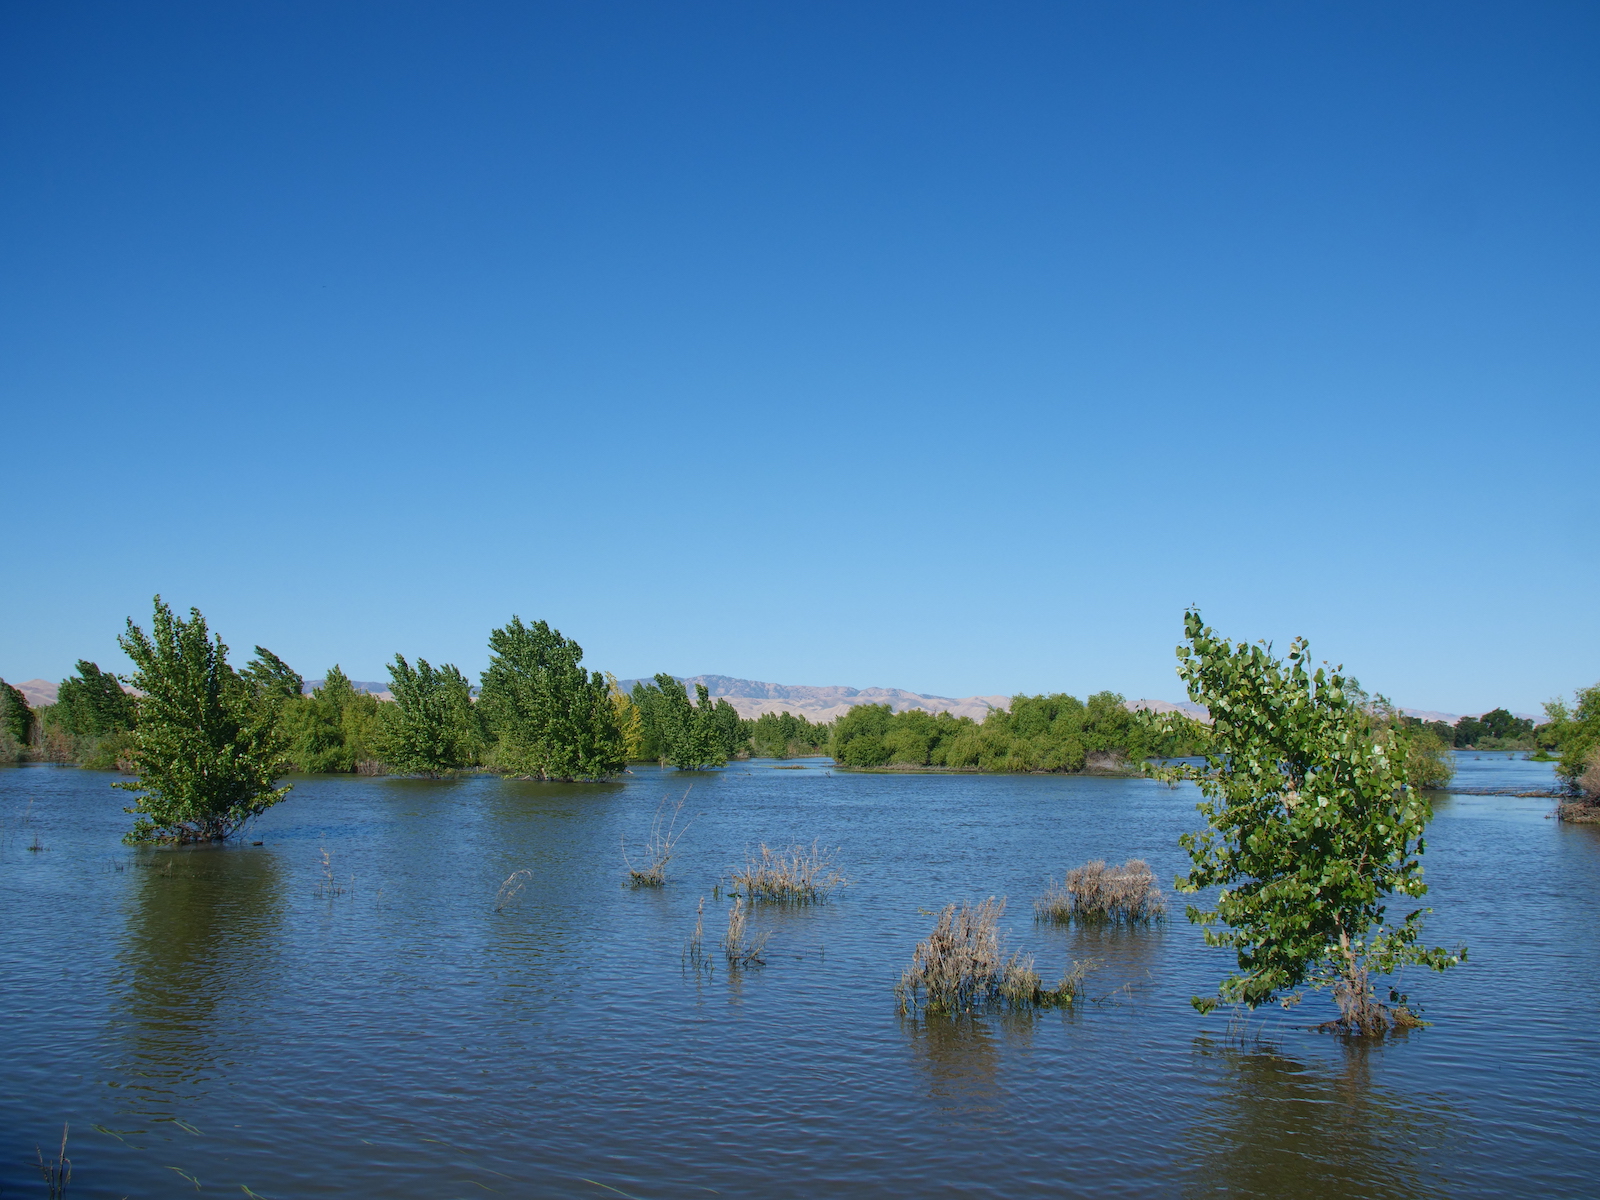 a wide swath of shallow water over a floodplain with trees and grass under a undecorous sky